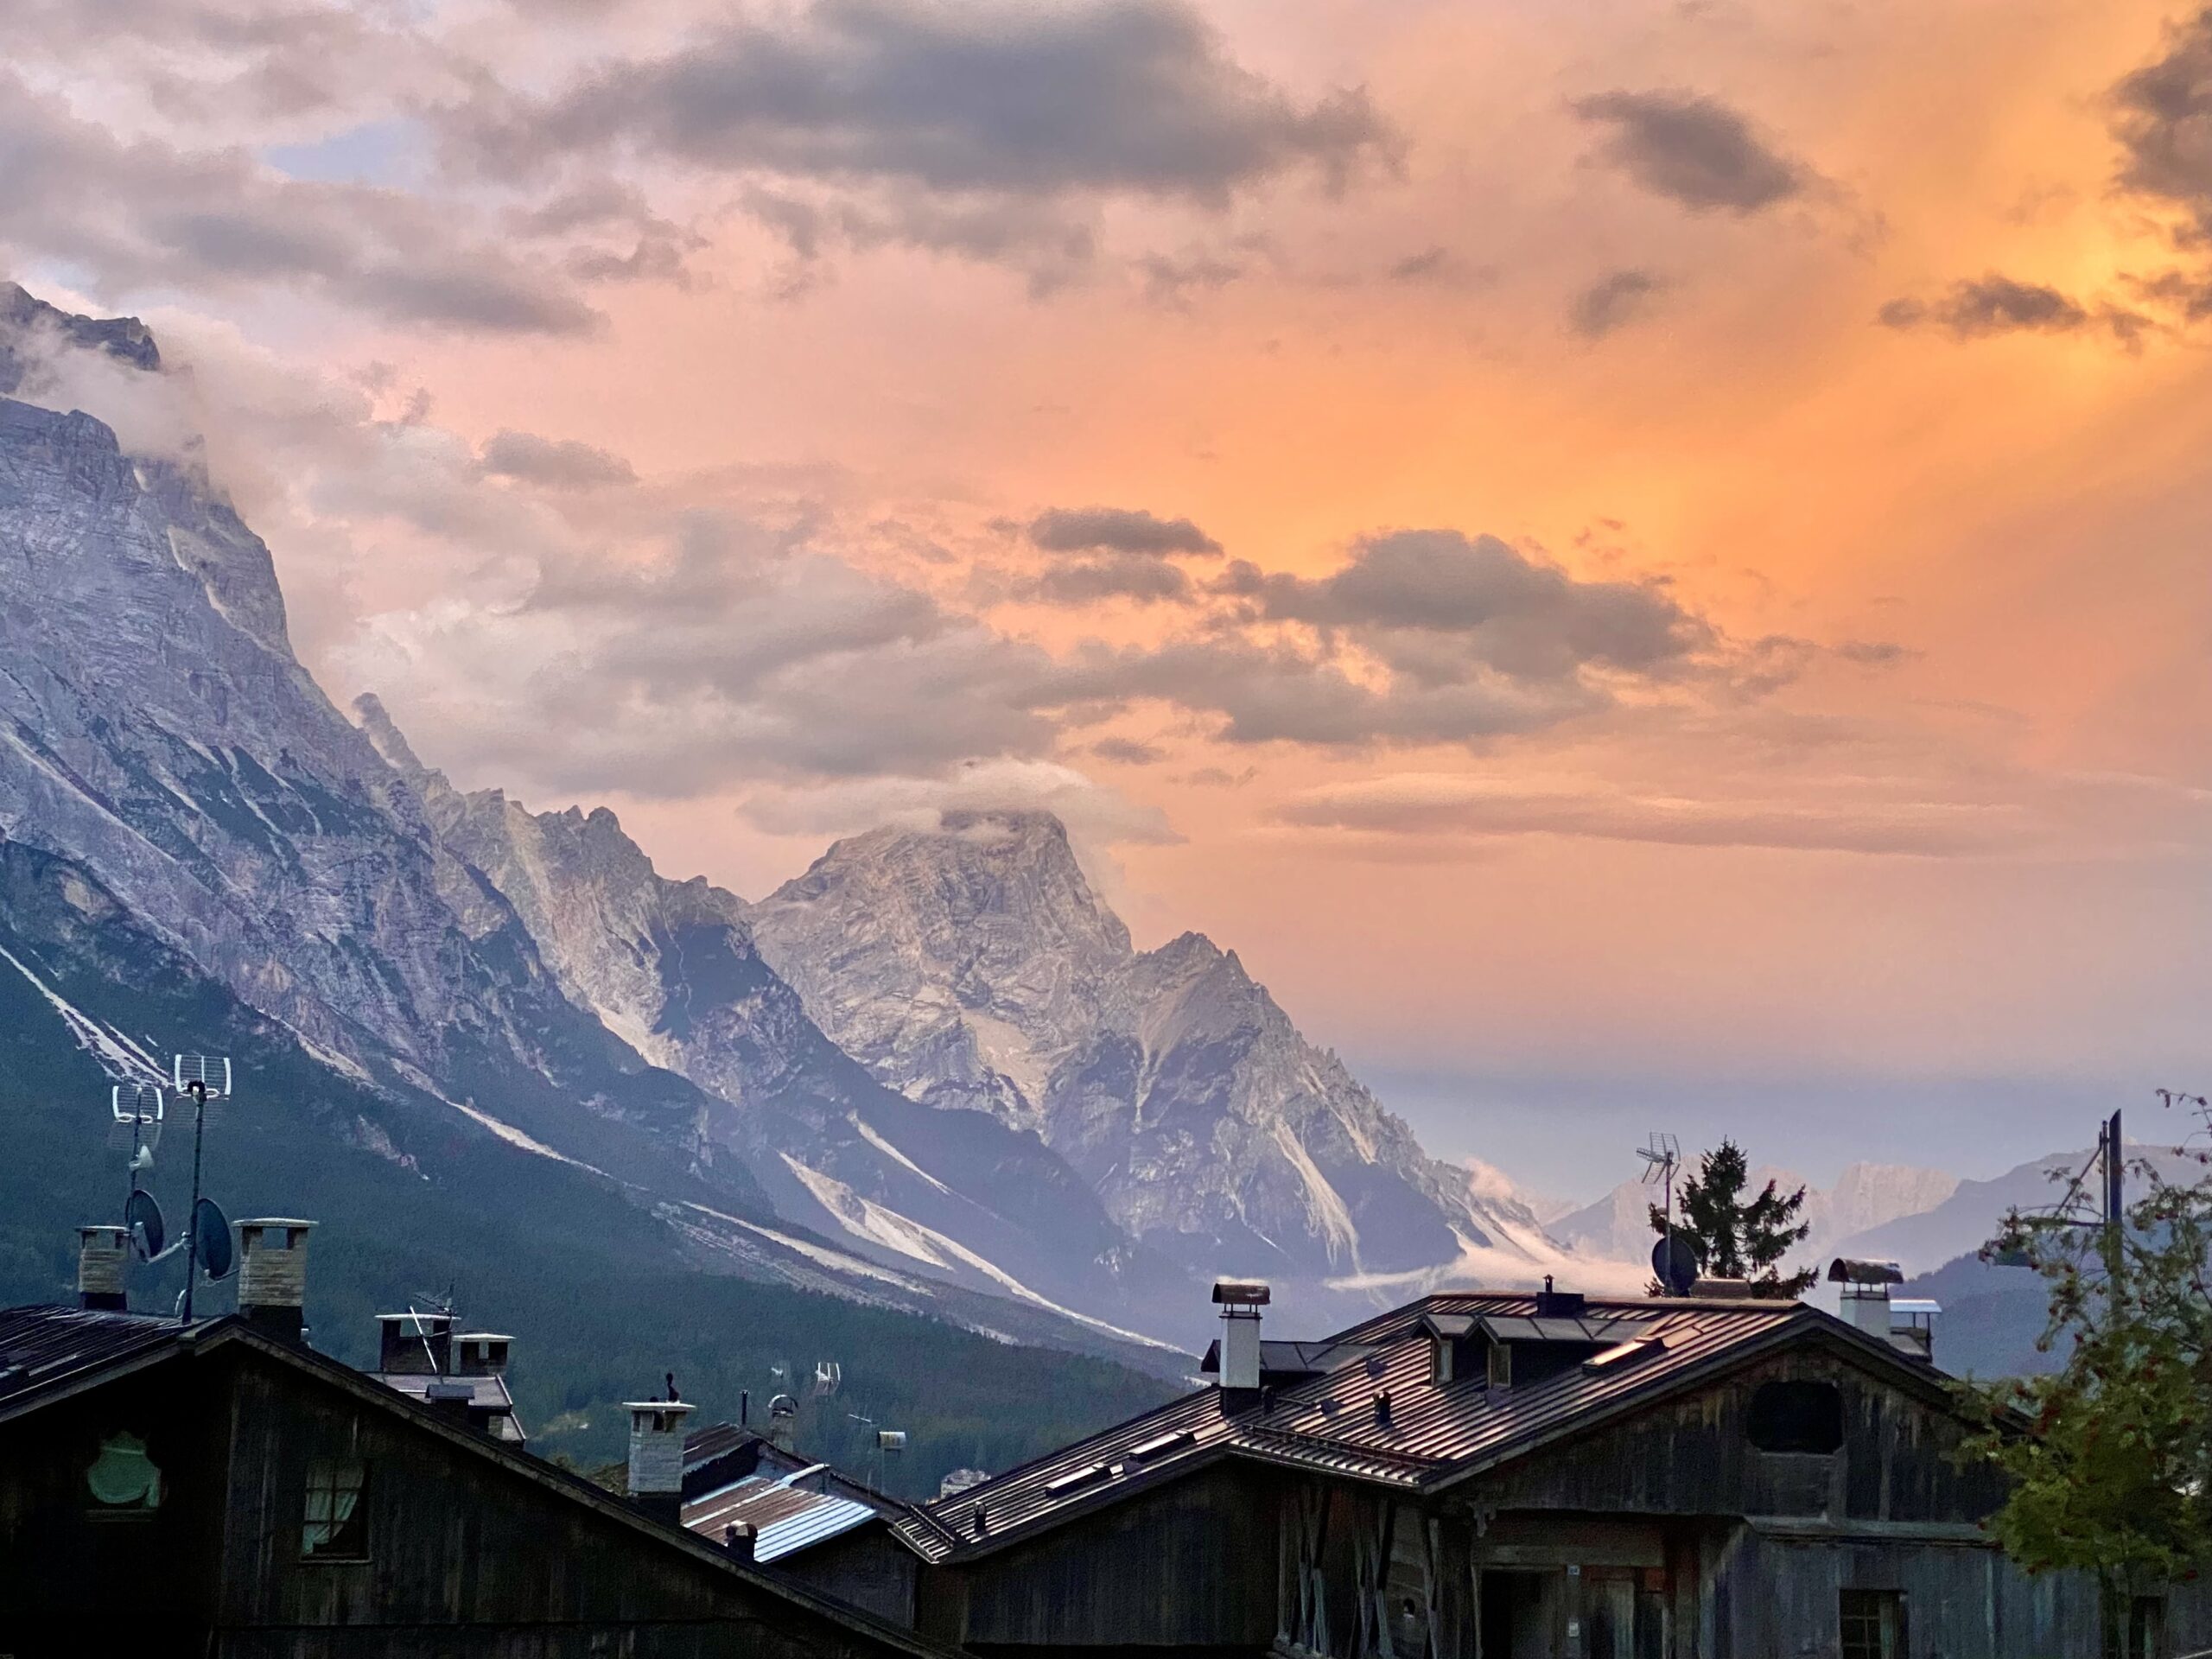 Sunset in Cortina d’Ampezzo, Italy (Photo Credit: 2 Dads with Baggage)